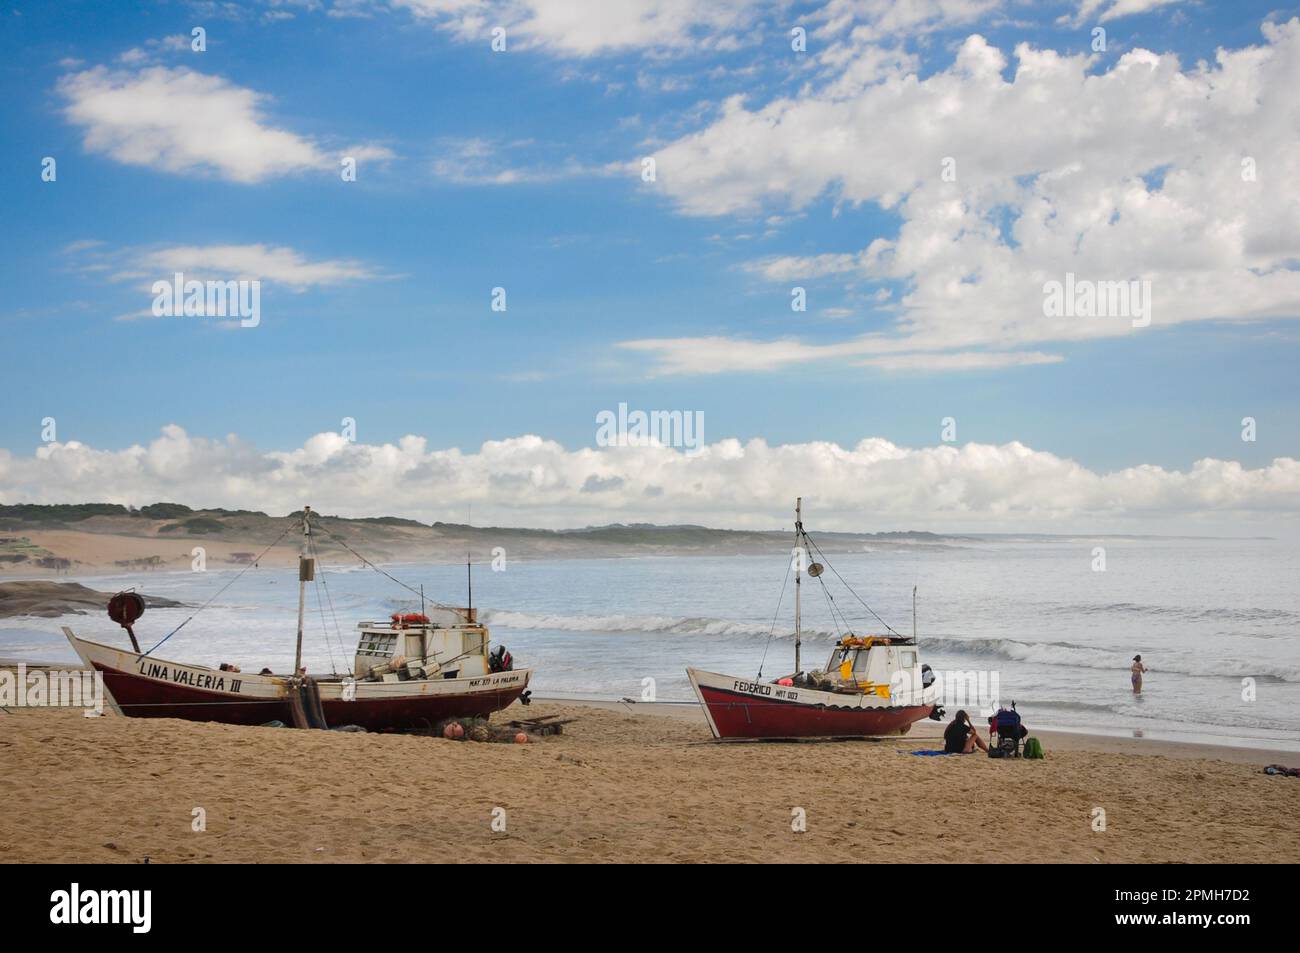 A couple of fishing boats on the sand of Punta del Diablo beach, while one person rests on the sand and another swims in the sea Stock Photo